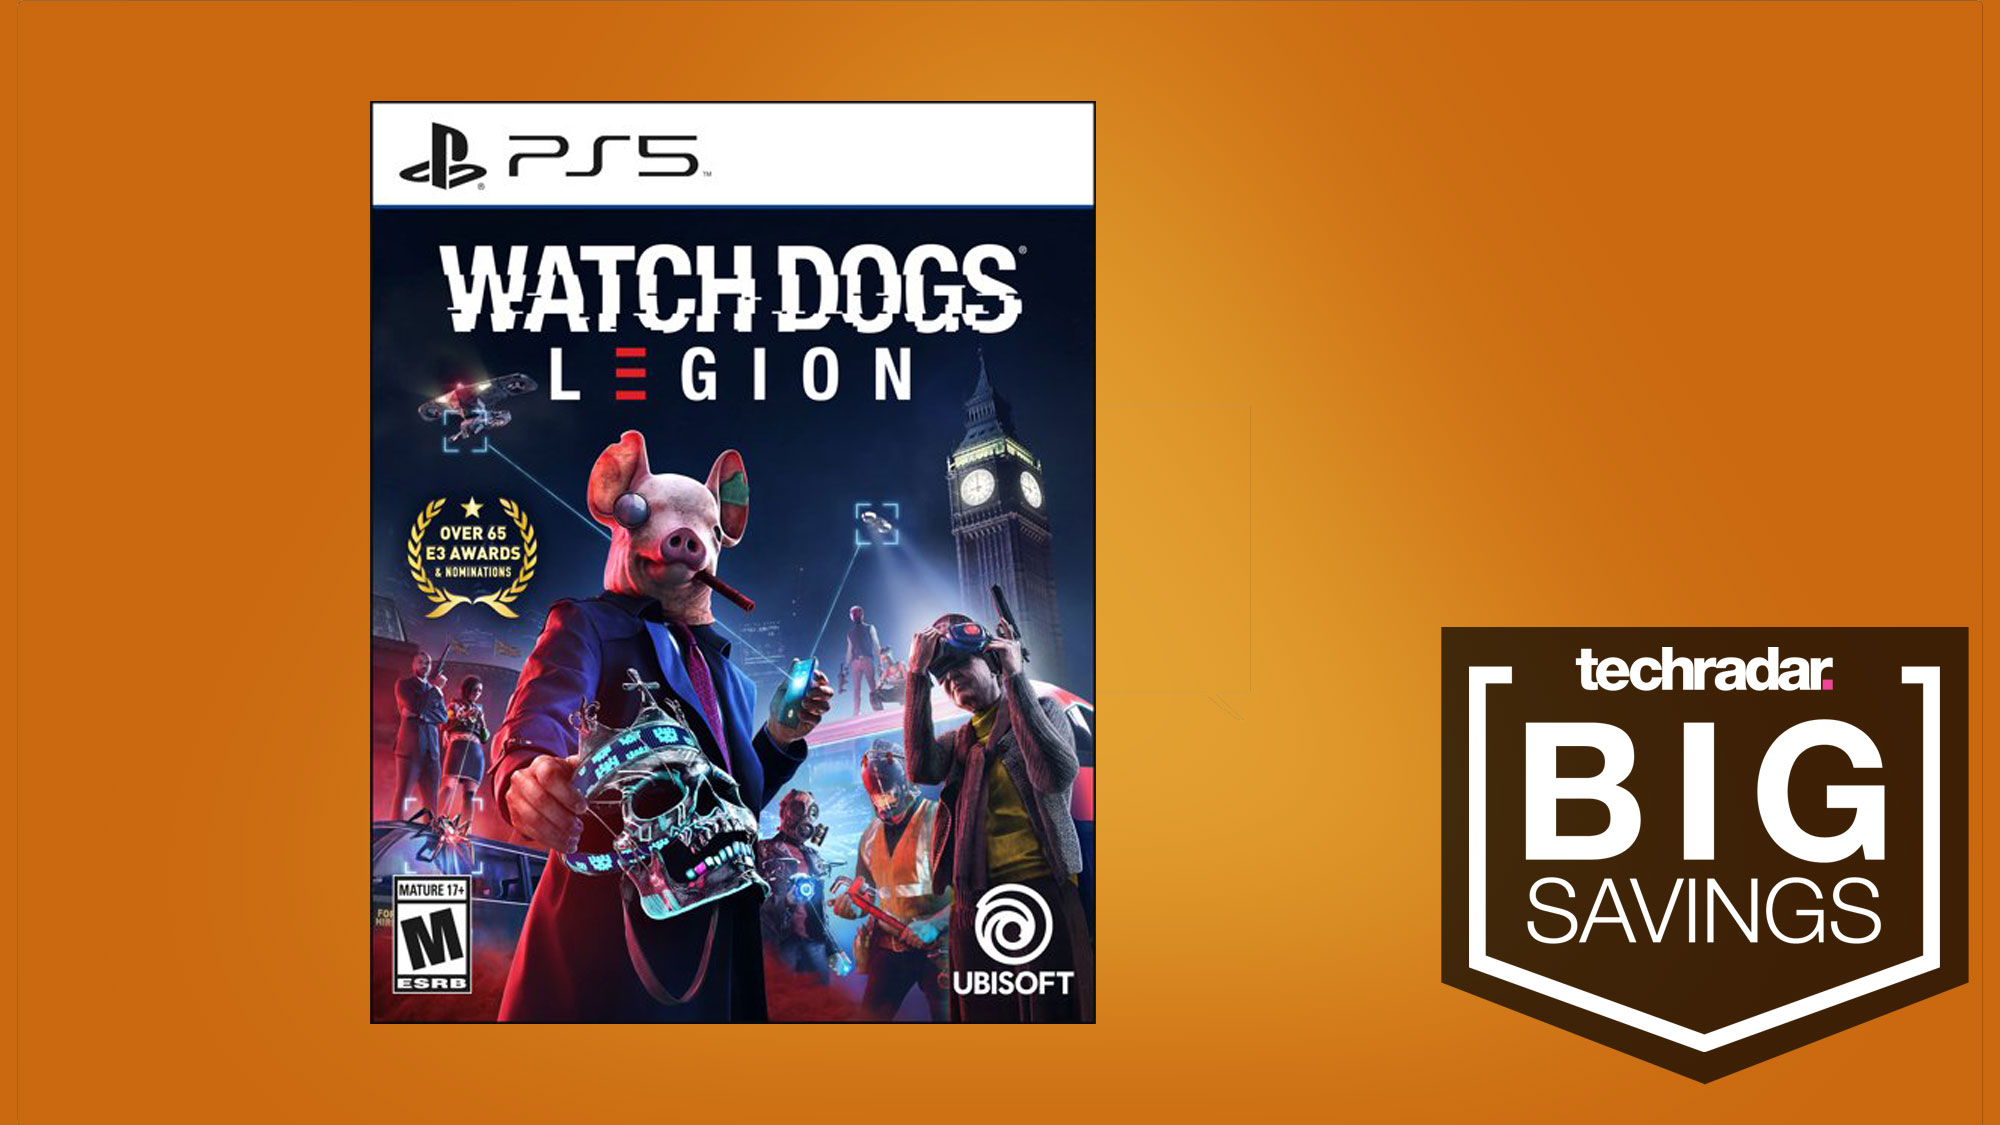 Watchdogs legion PS5 game on yellow background